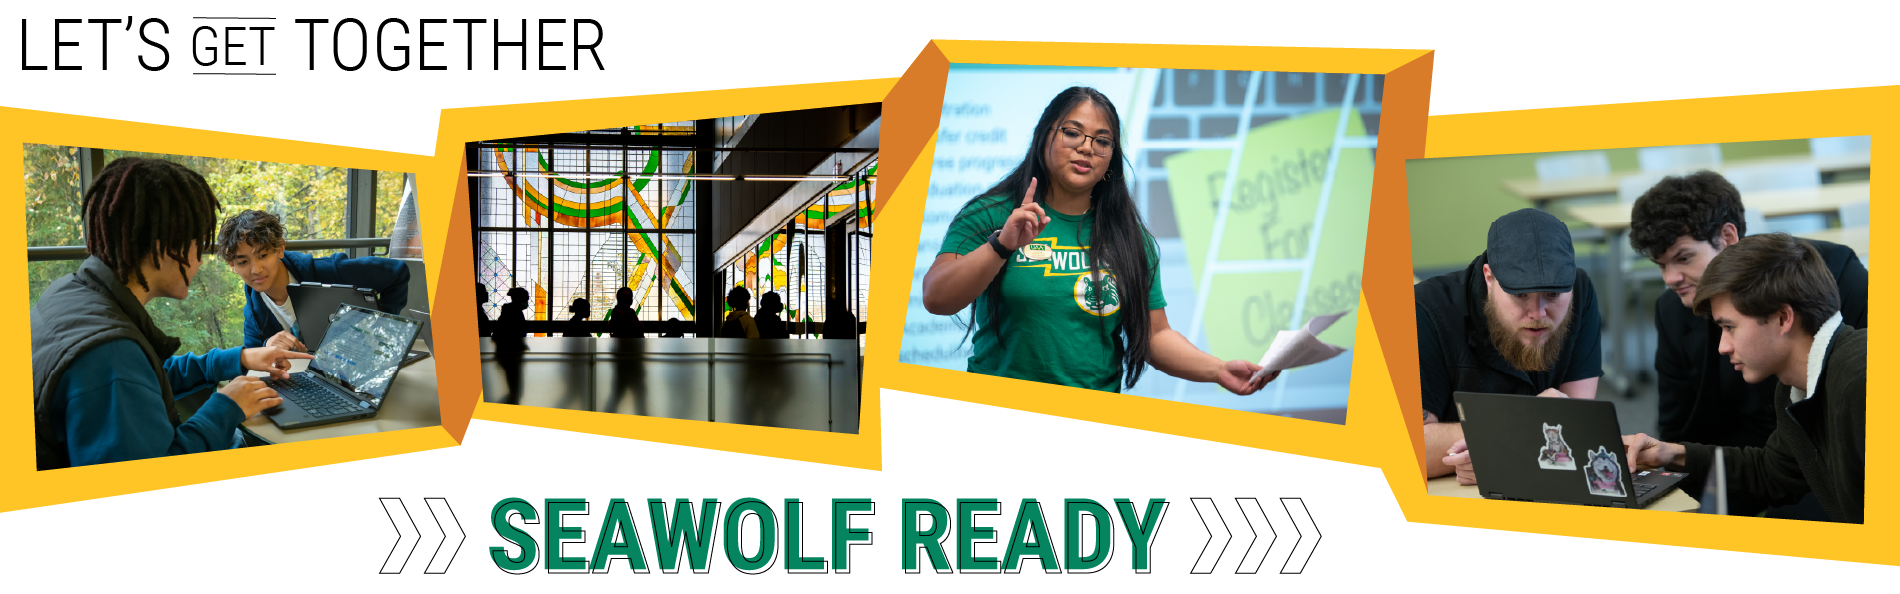 Let's Get Together: Seawolf Ready